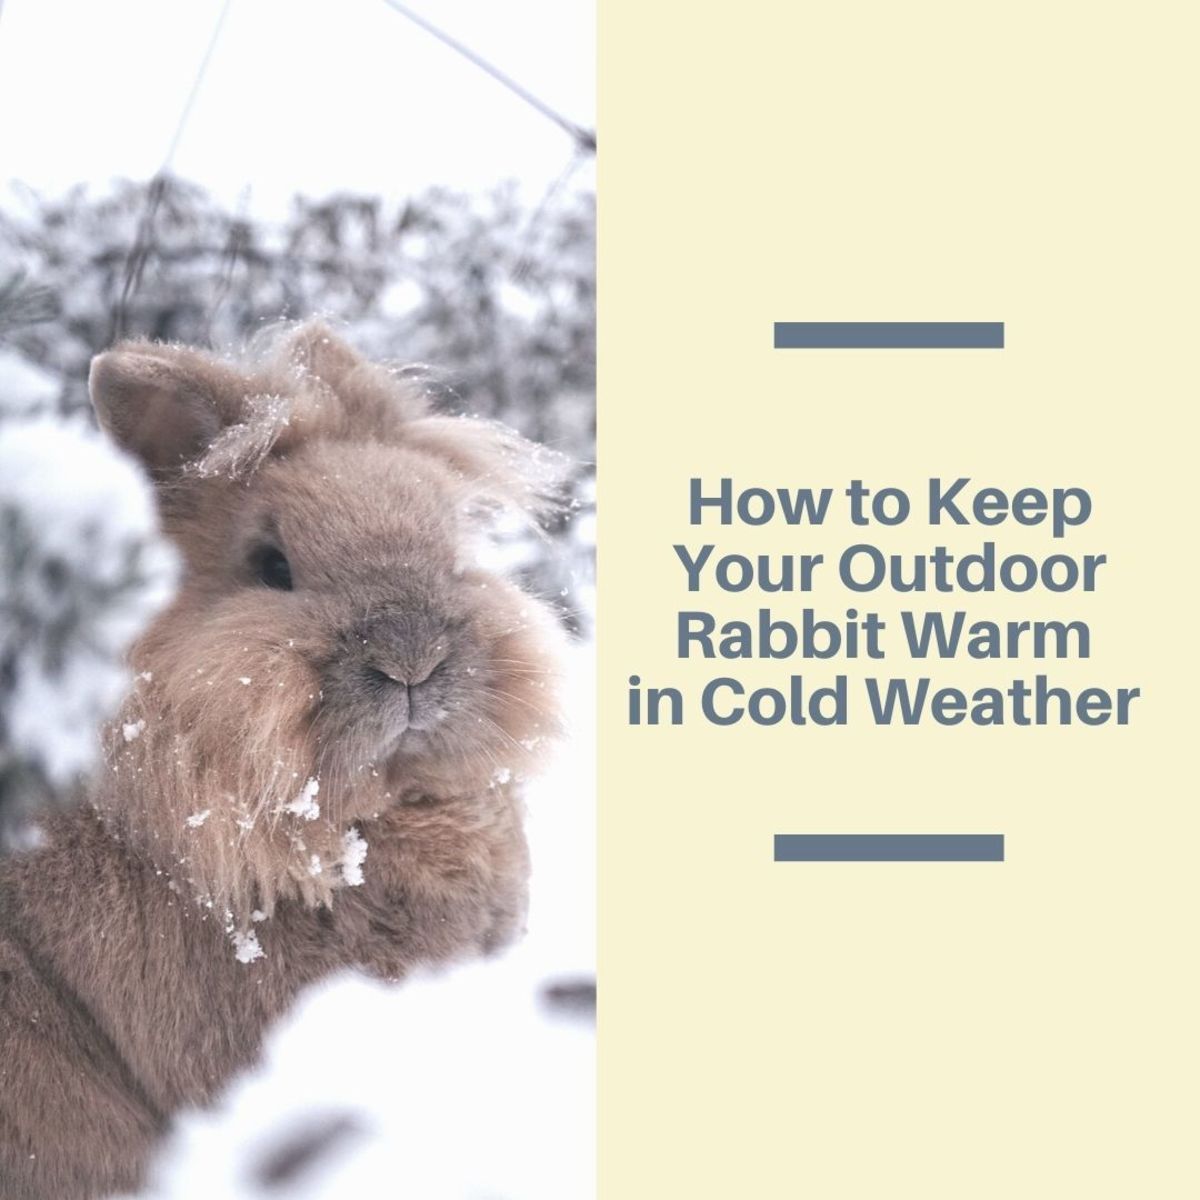 Cold Weather Care for Outdoor Rabbits